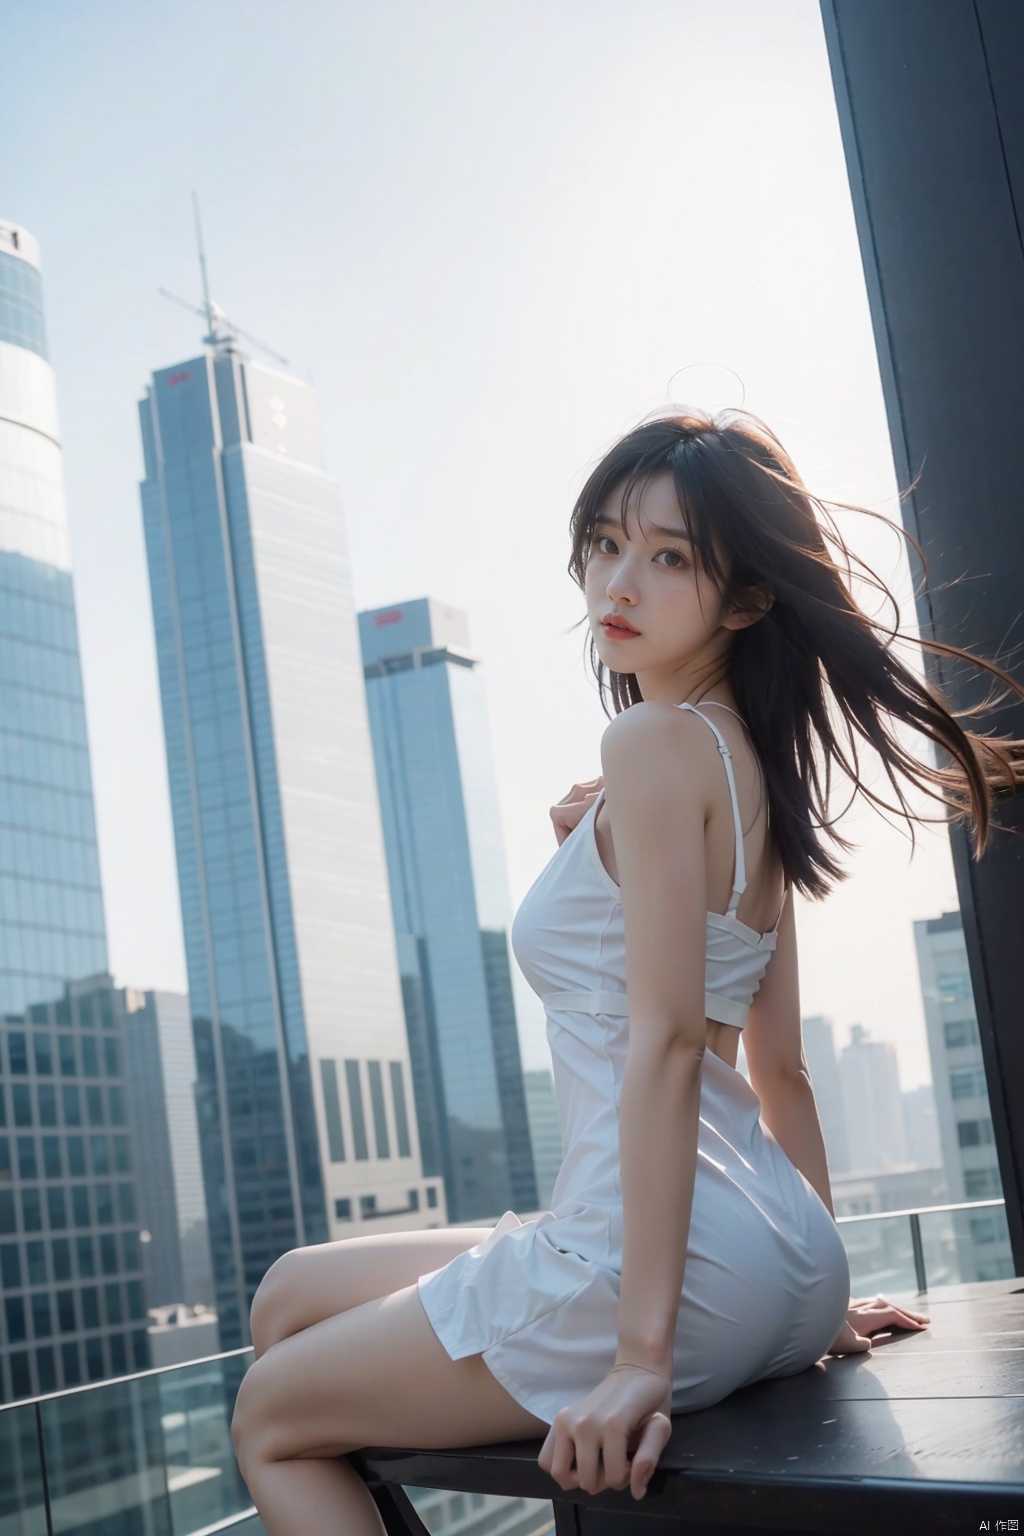 Extremely realistic detailed, high-quality ultra wide angle lens photography, from a Chinese fashion style girl, modern style seated on the edge of skyscrapers, we can see her from bottom, her hair moving in wind